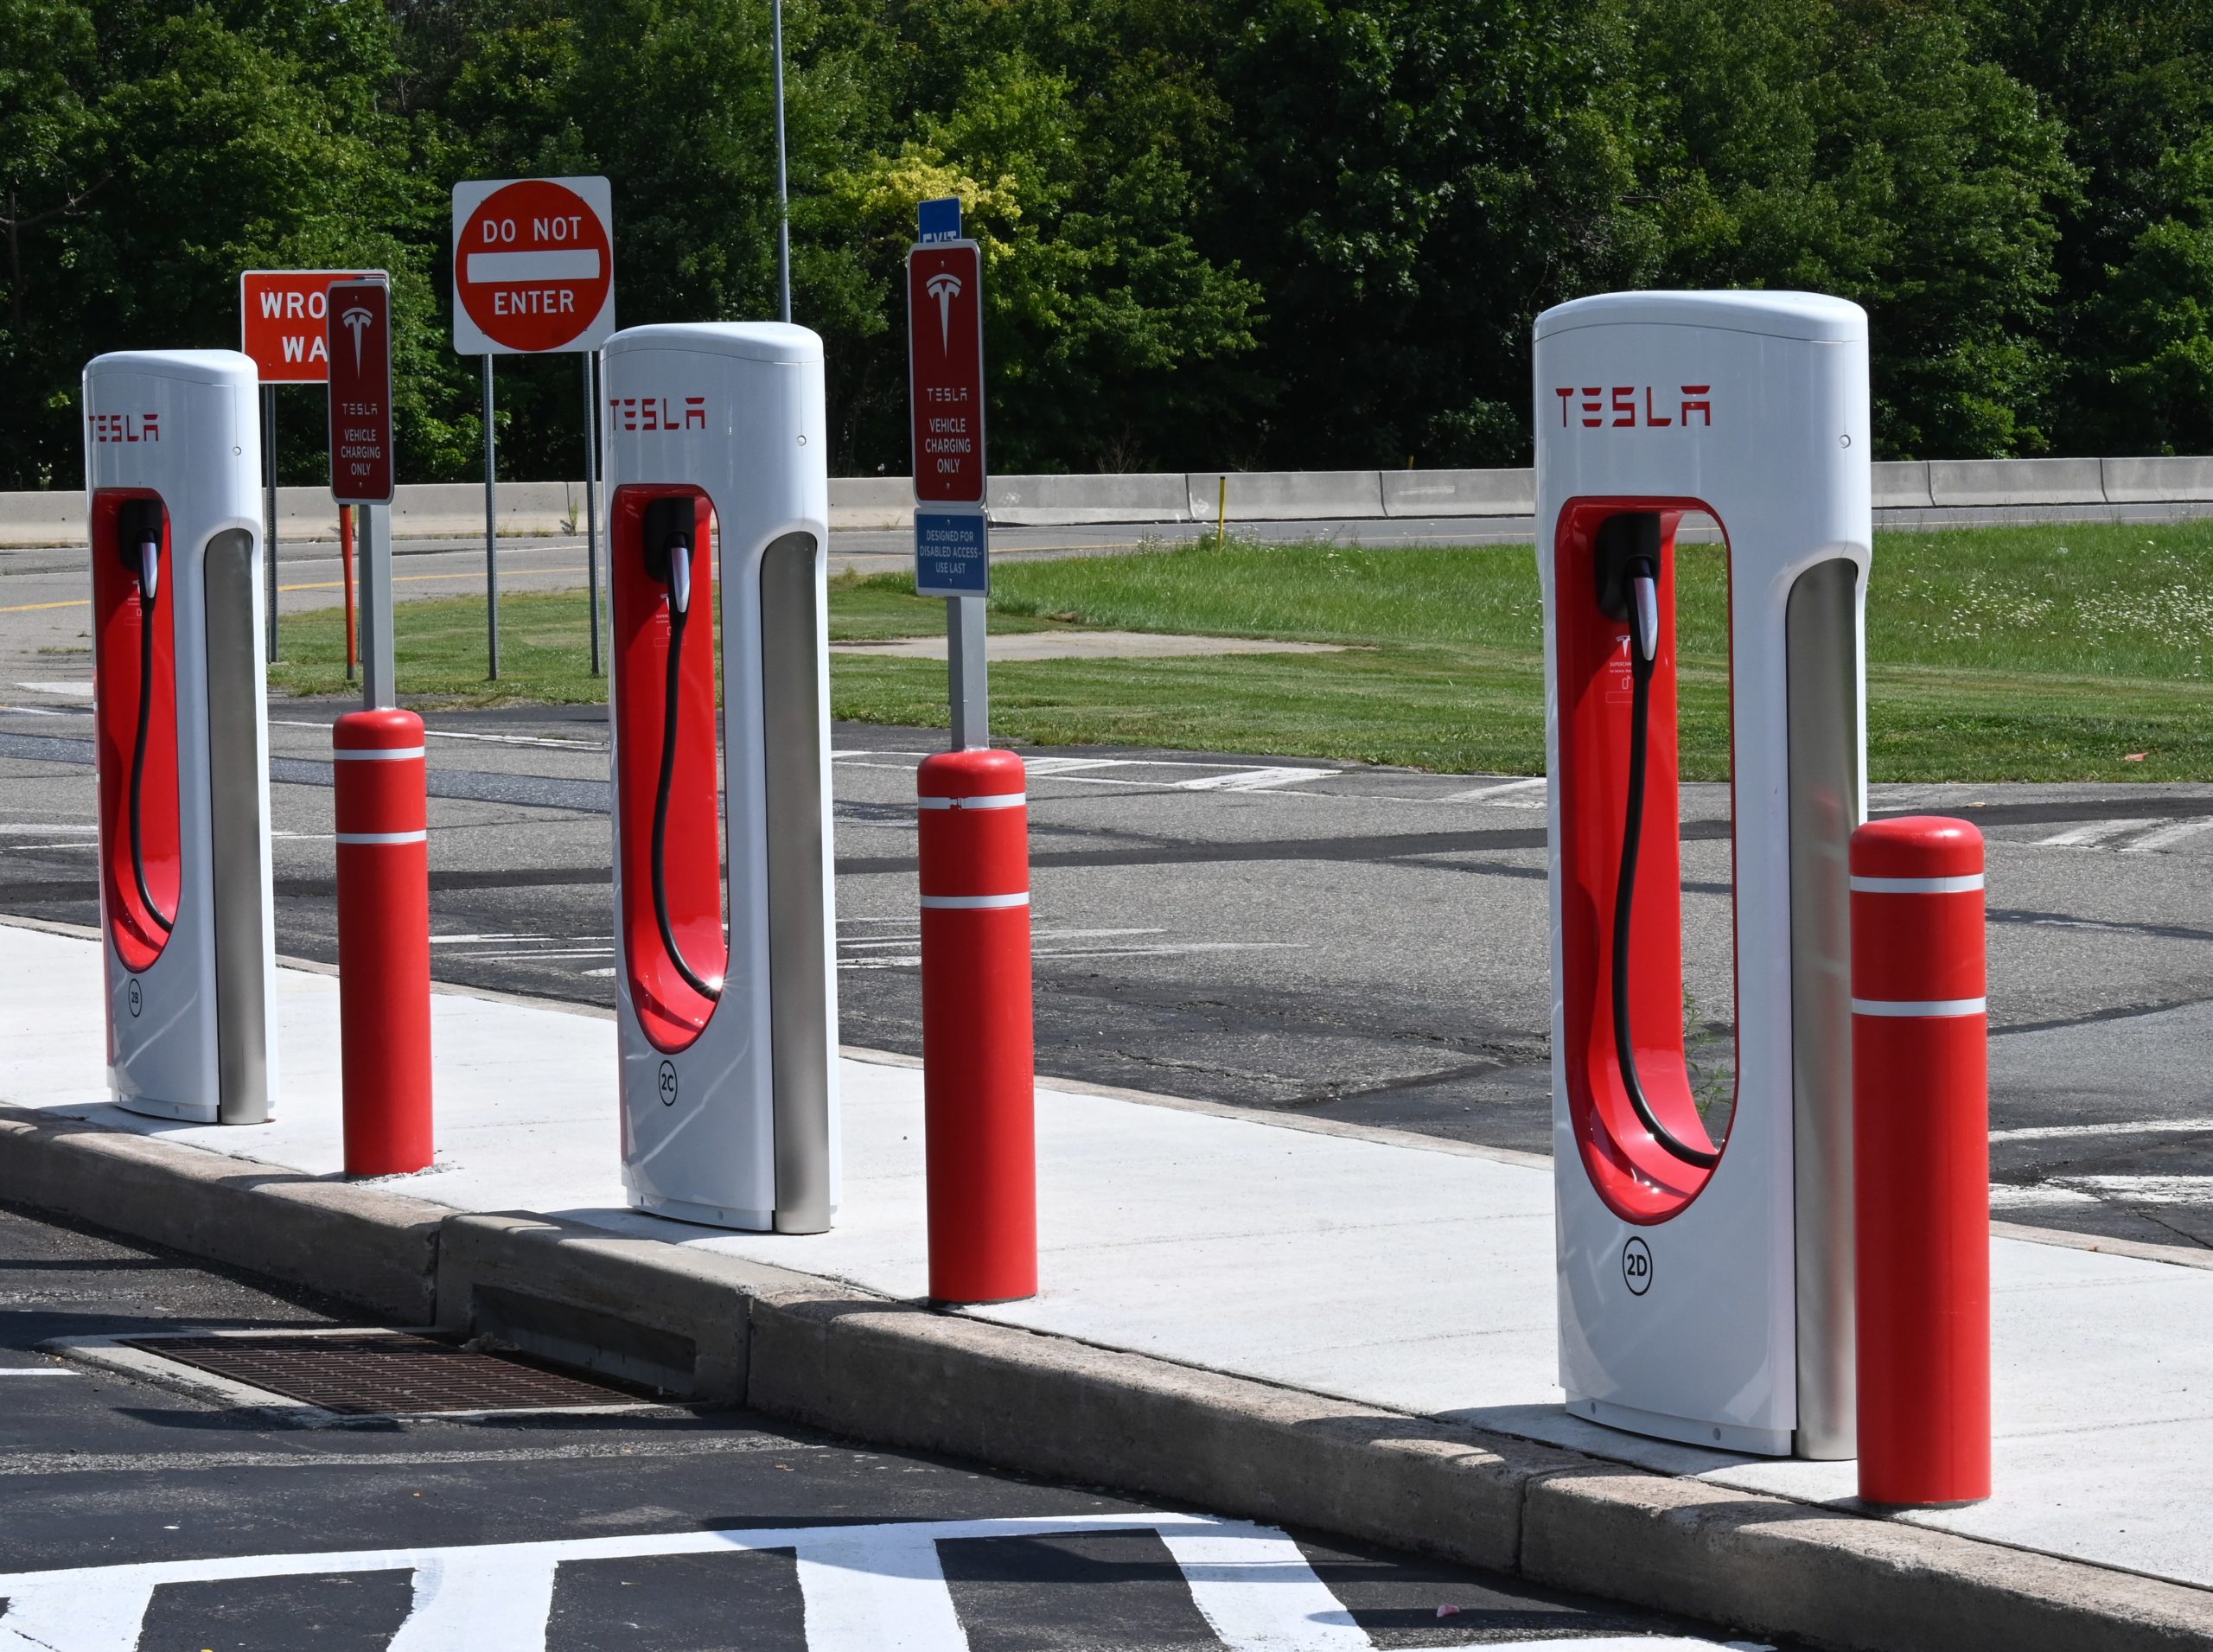 Tesla drops its charging wall in Europe to boost EV adoption 1